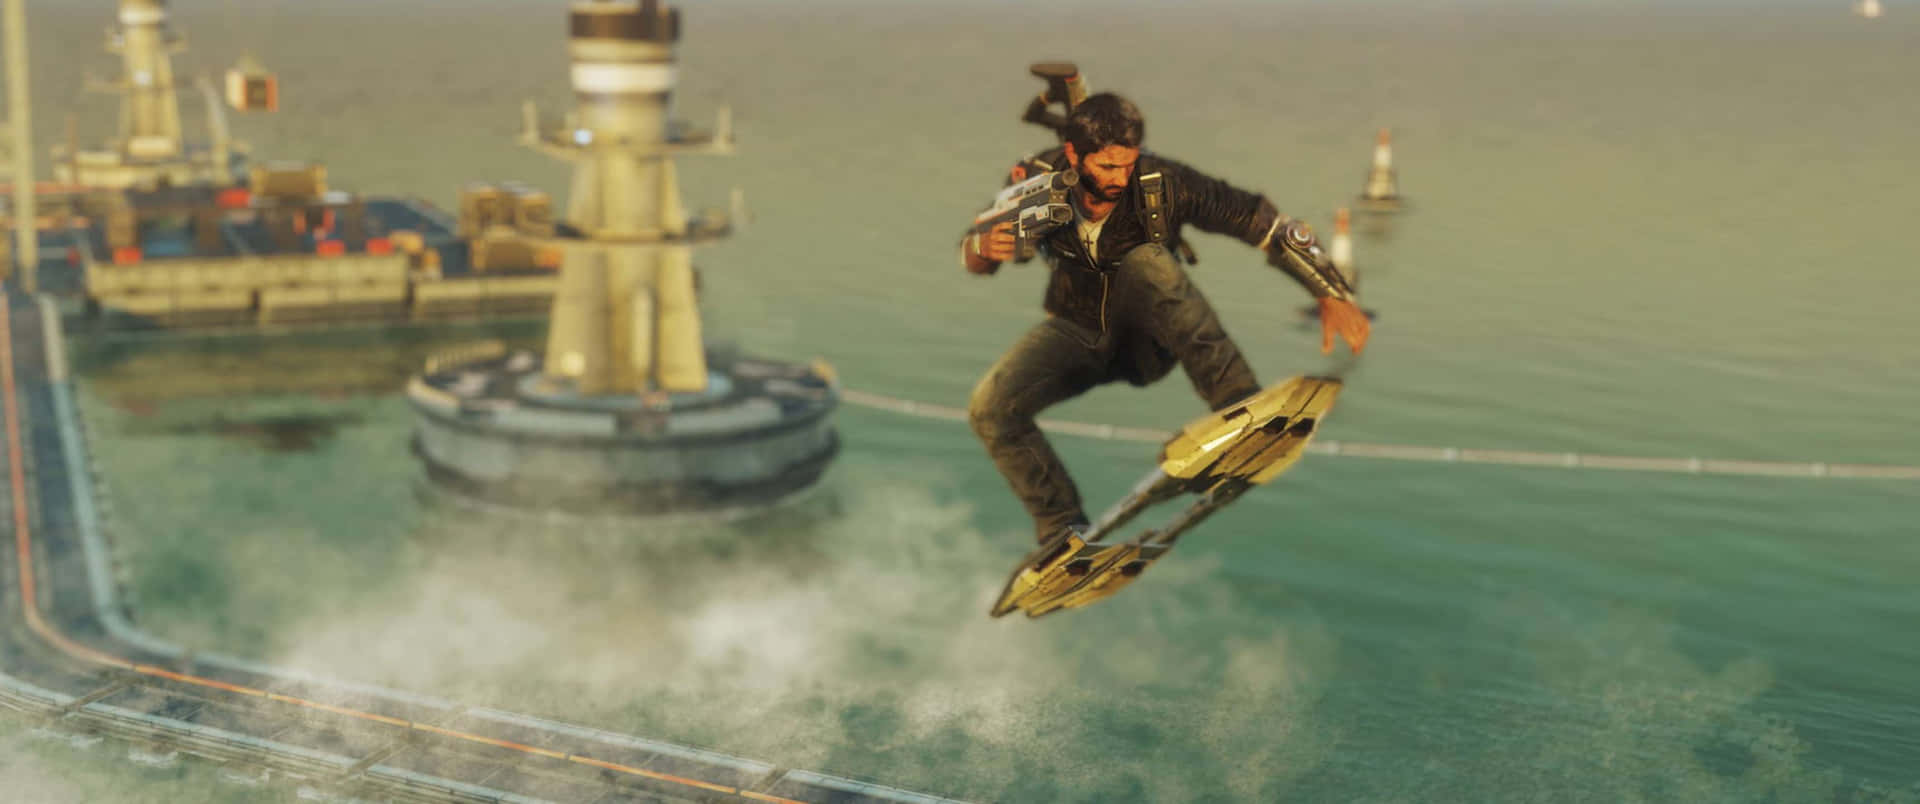 3440x1440p Just Cause 4 Rico Surfing At The Sea Background